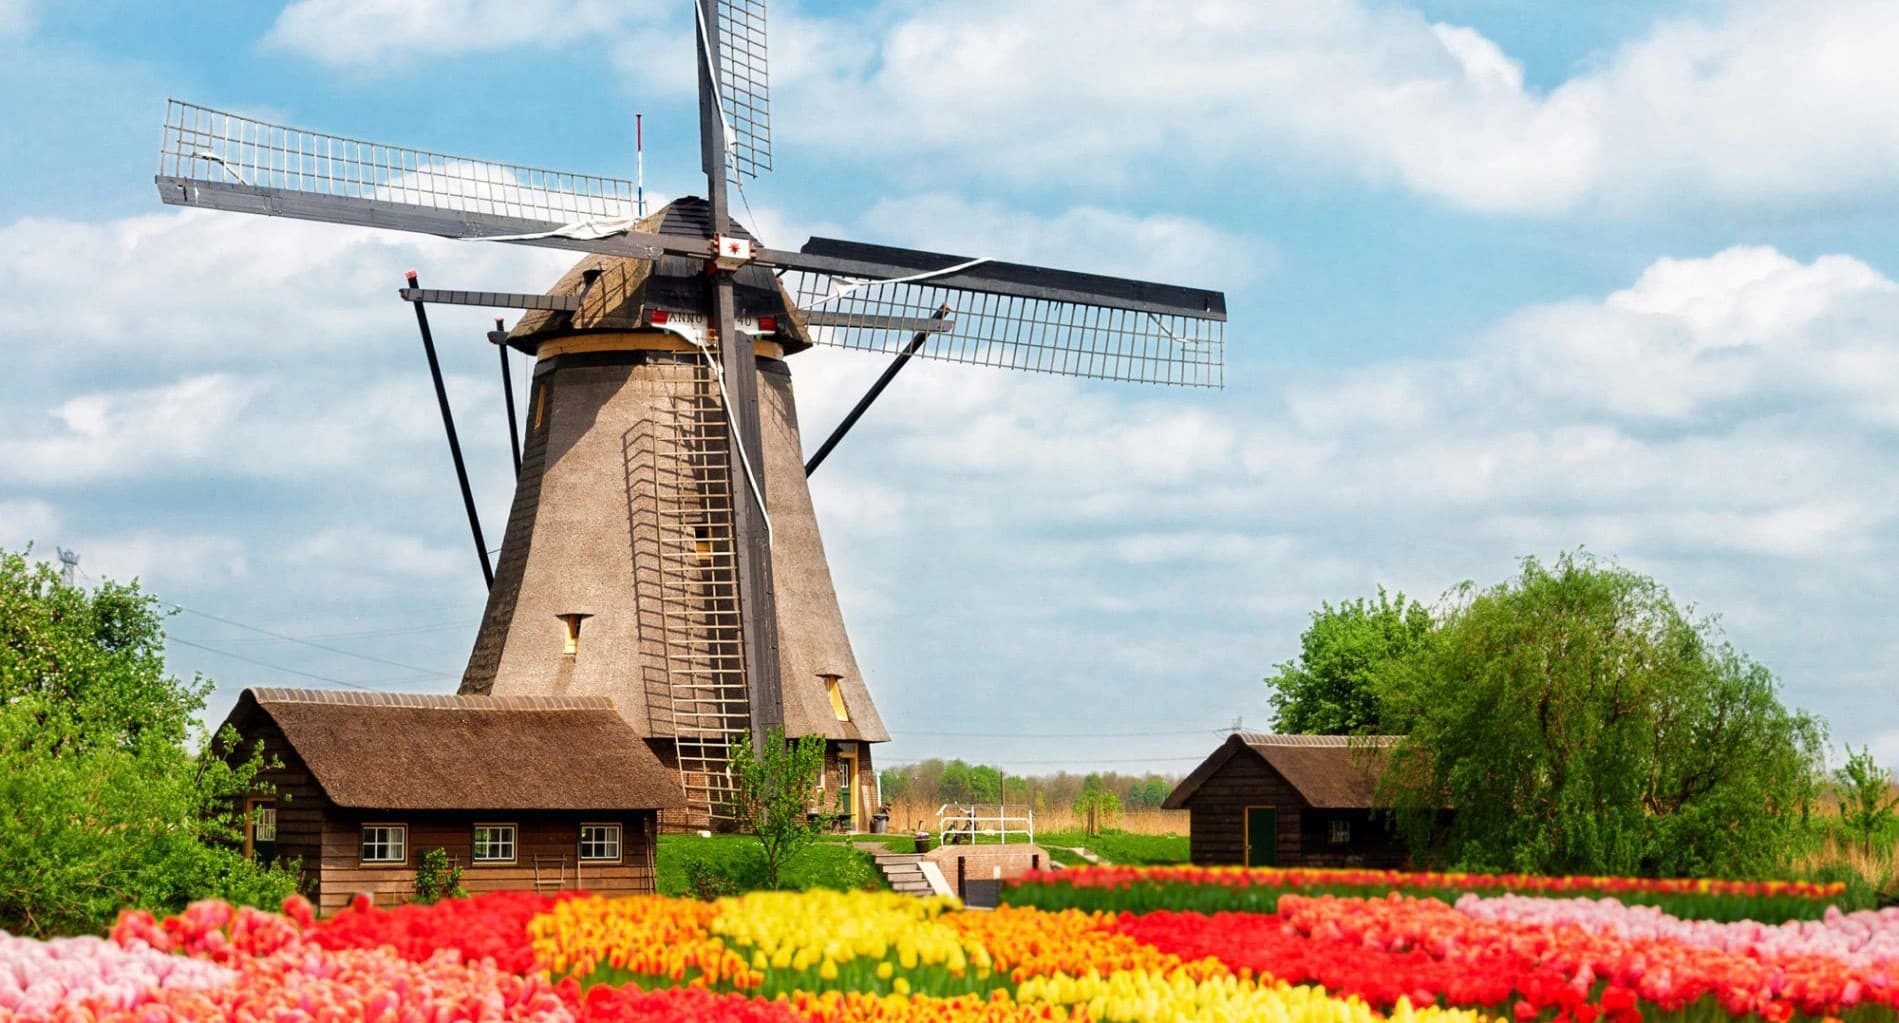 A traditional Dutch windmill with a thatched roof surrounded by colorful tulip fields